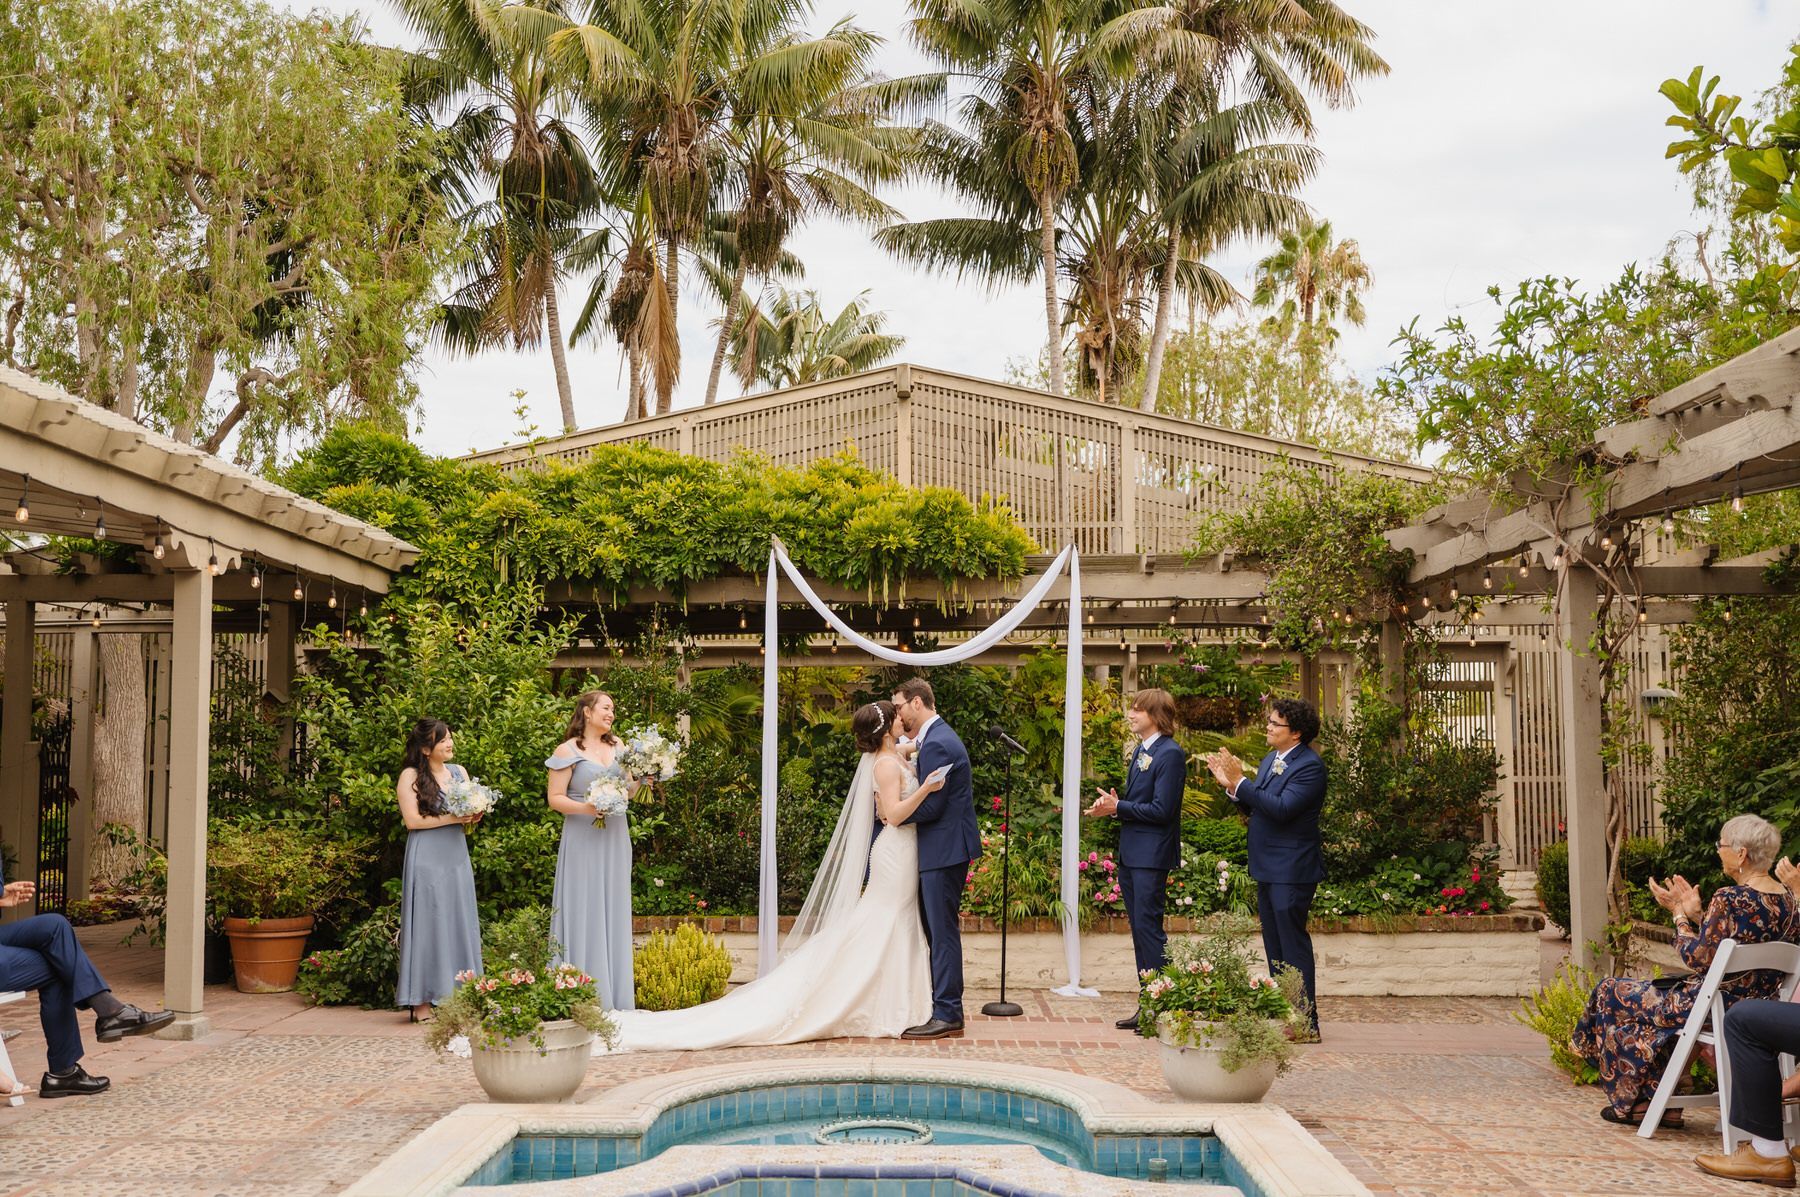 A bride and groom are kissing at their wedding ceremony in front of a pool.